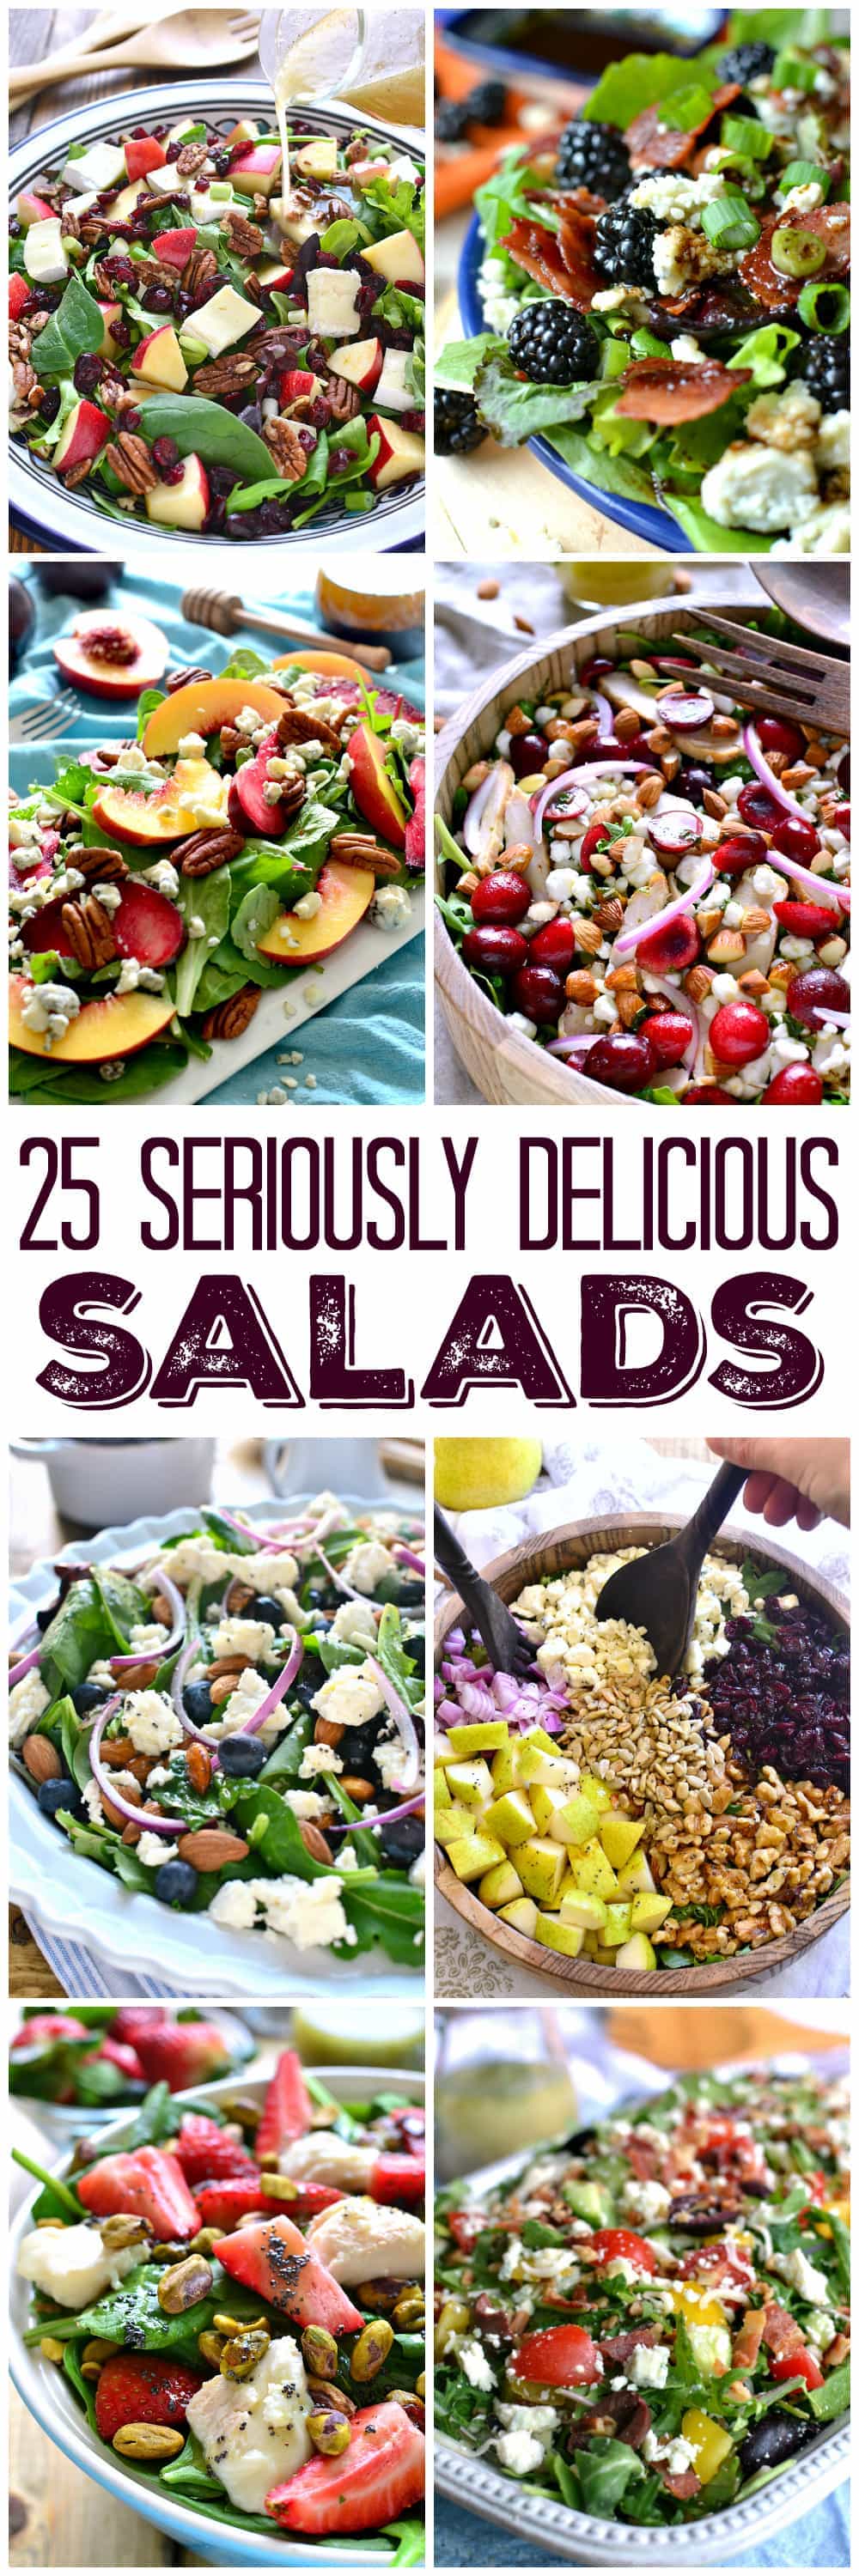 25 Seriously Delicious Salads - loaded with all the best ingredients! A salad for every occasion and every taste!